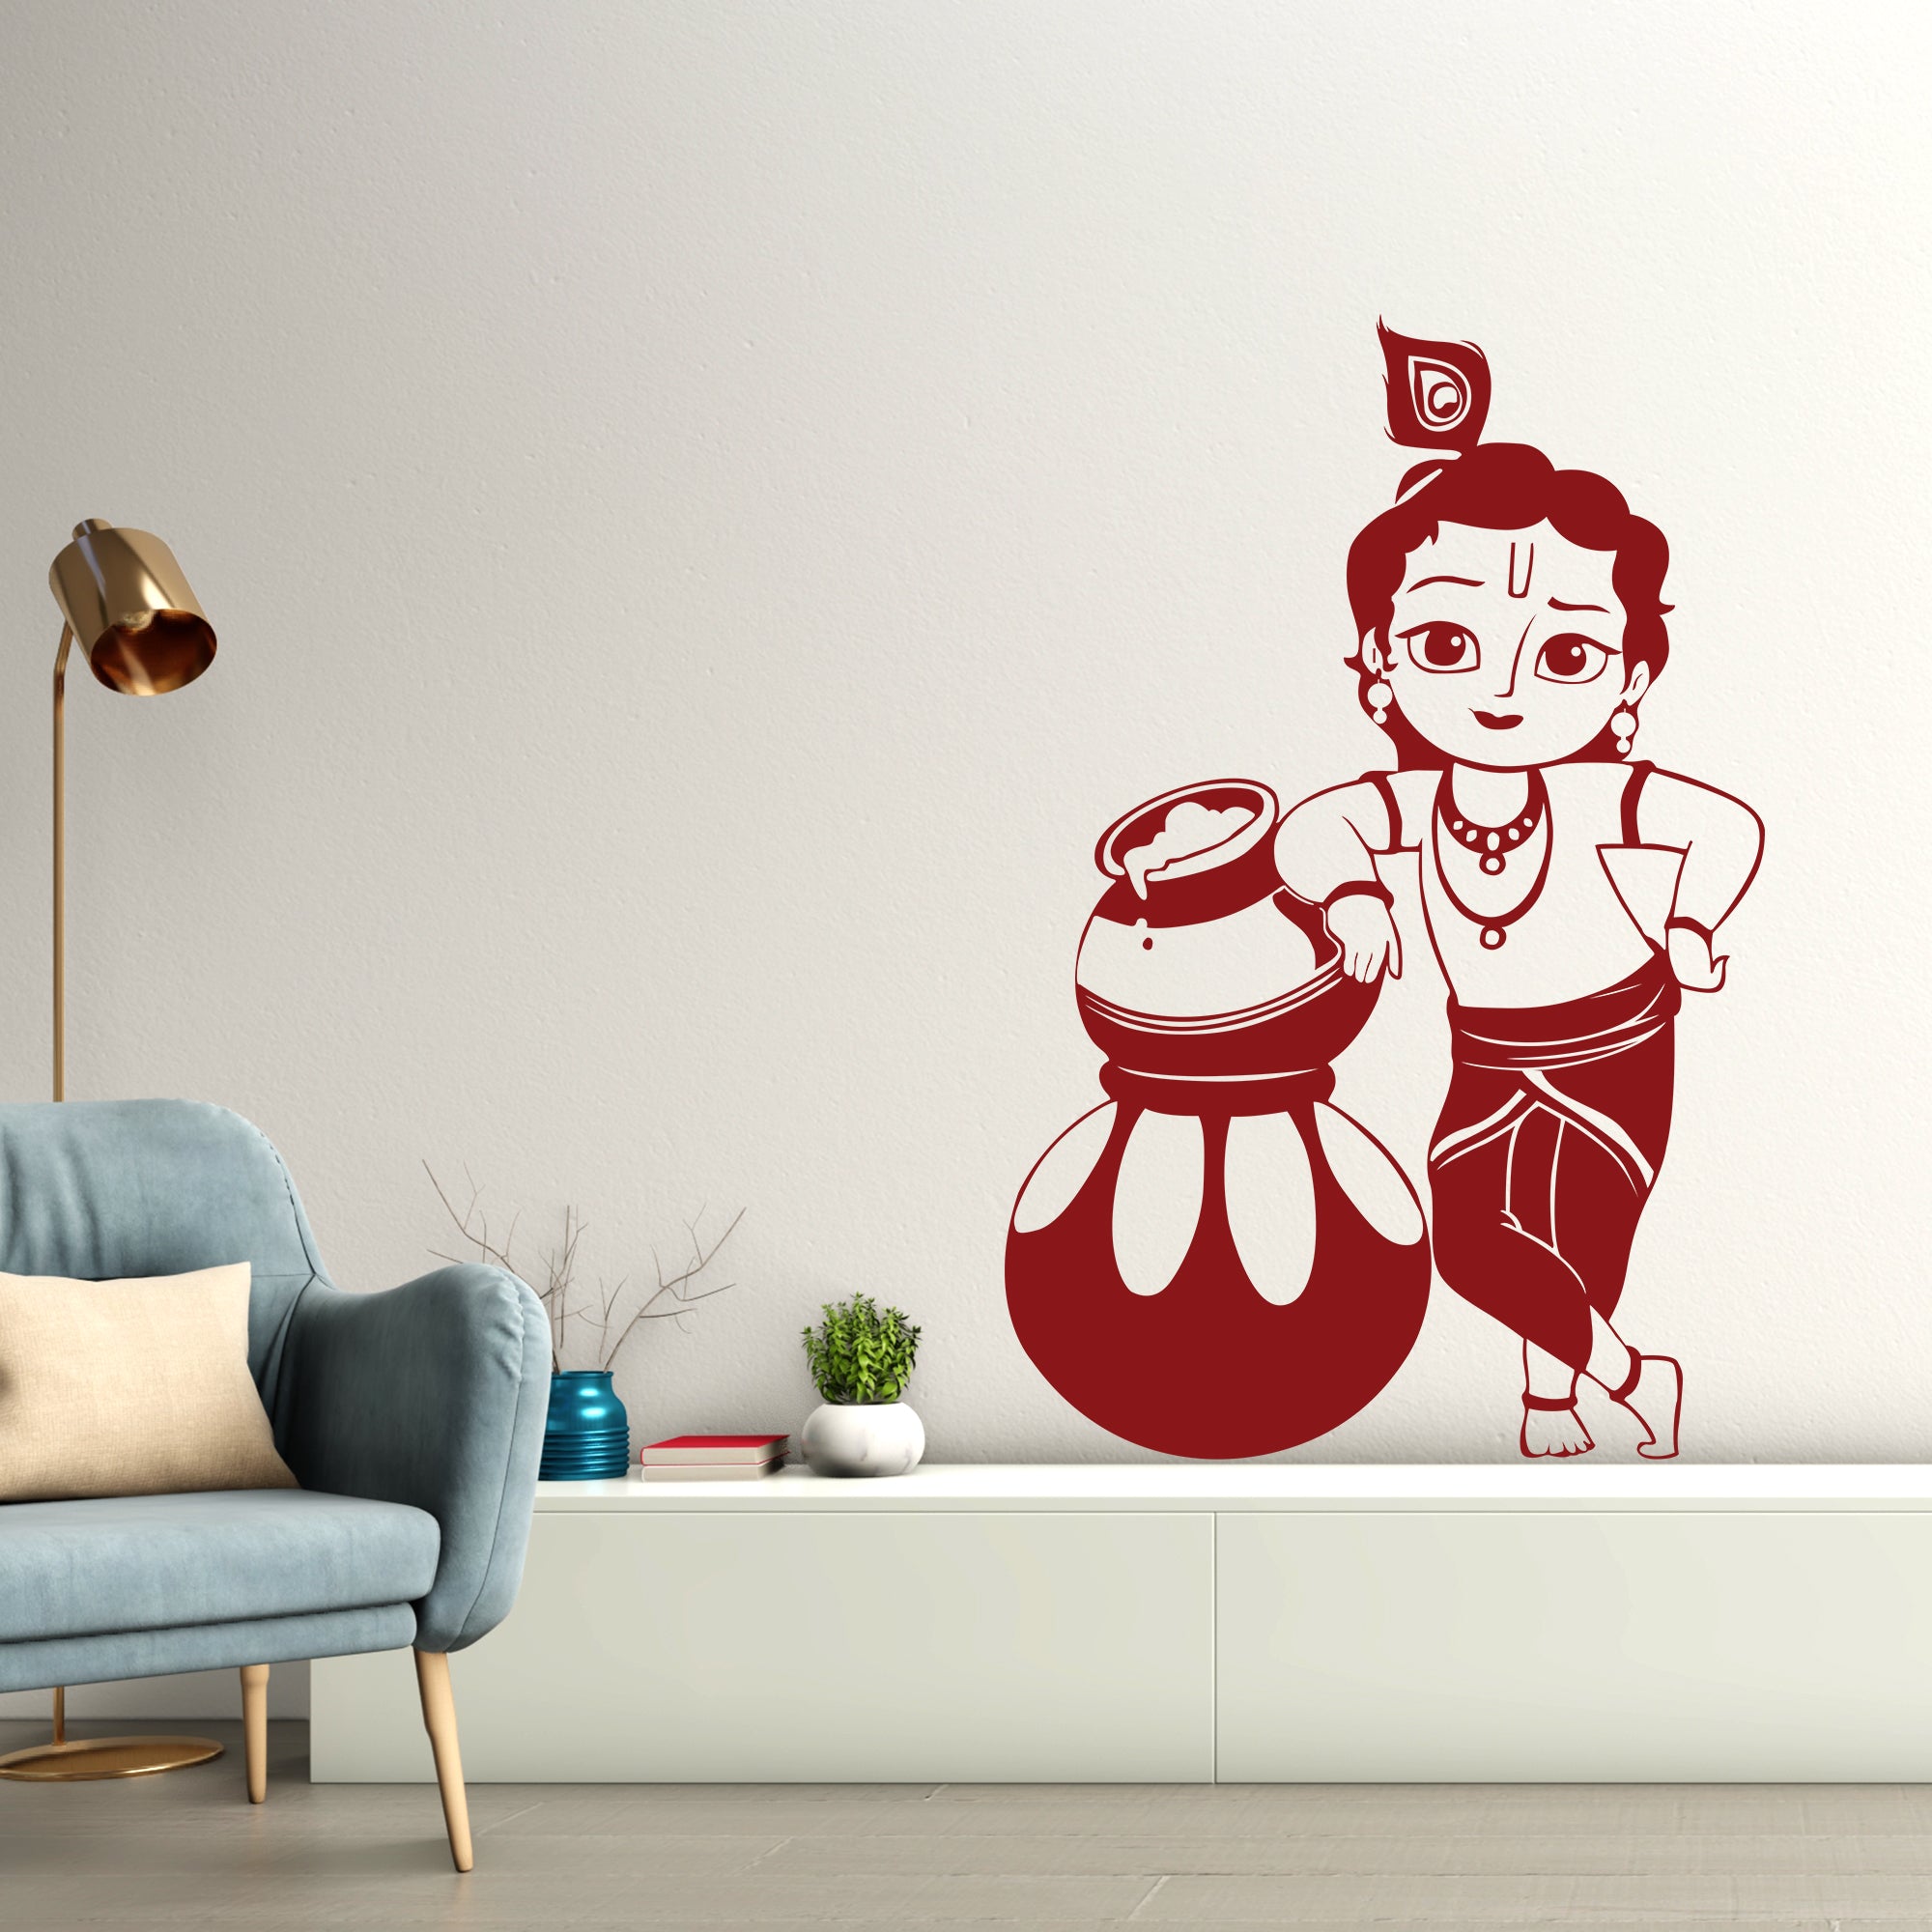  Premium Quality Wall Sticker in Brown Color